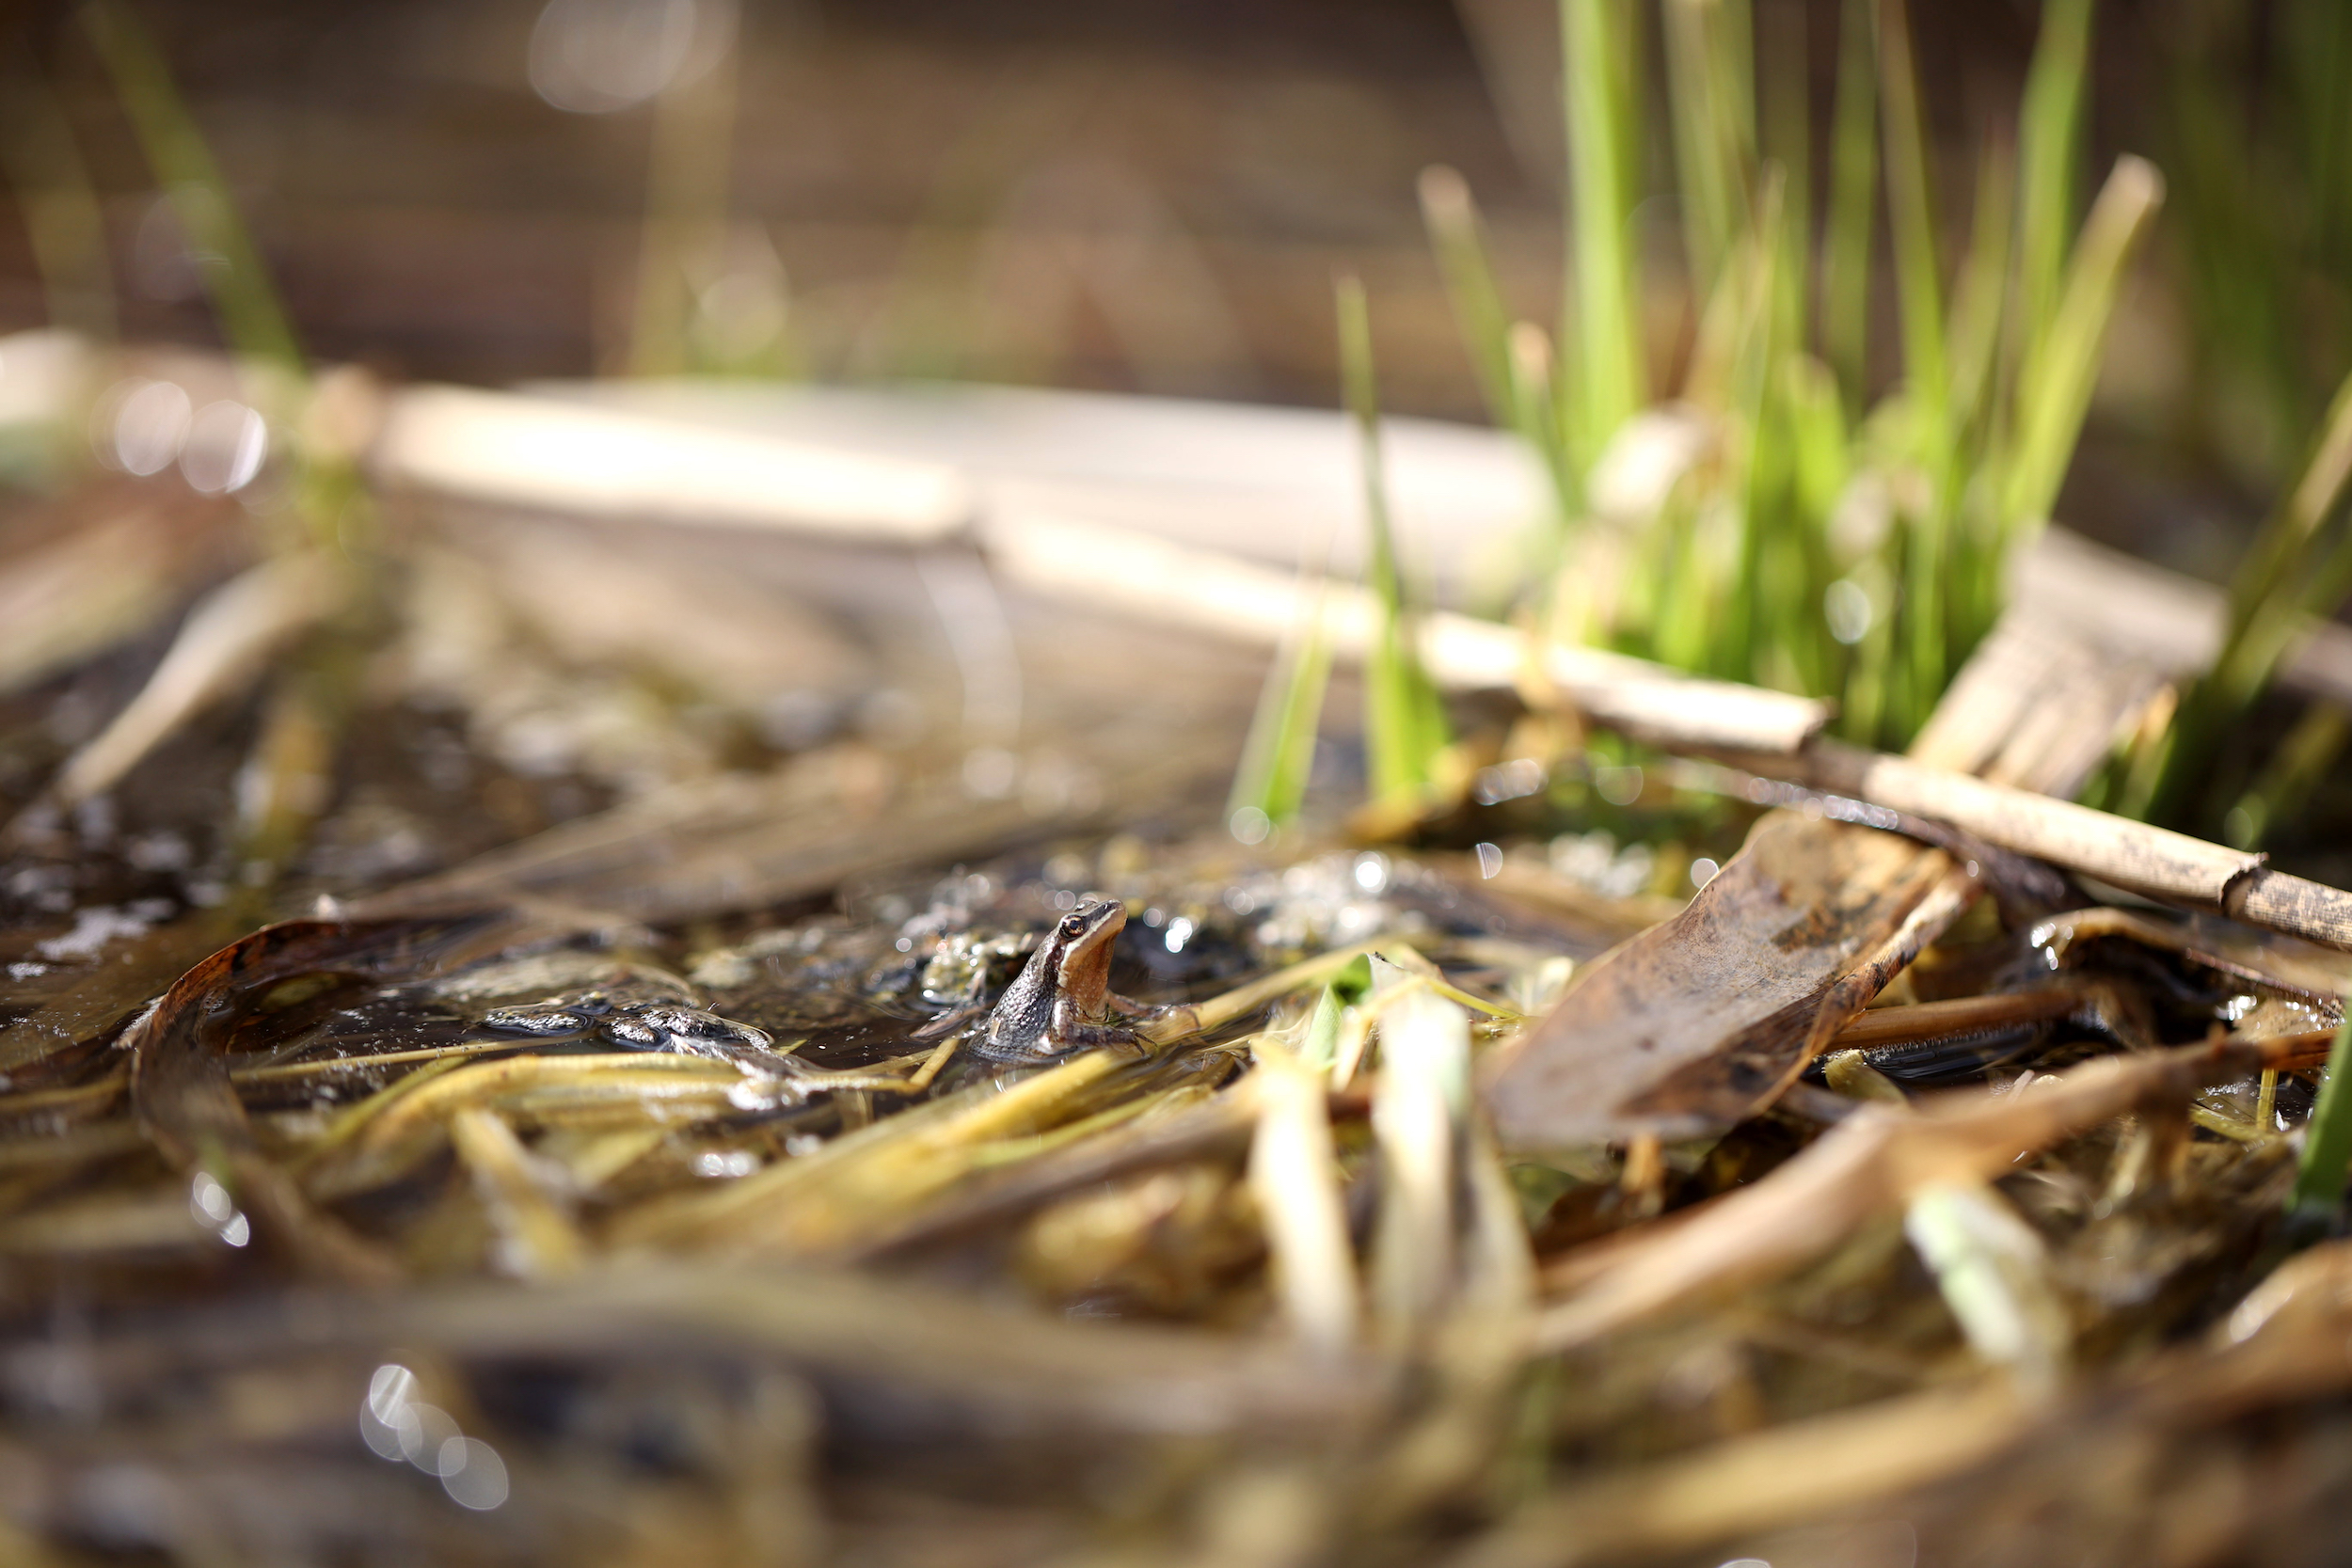 A chorus frogs at a pond in Longueuil, Quebec on April 15, 2022.